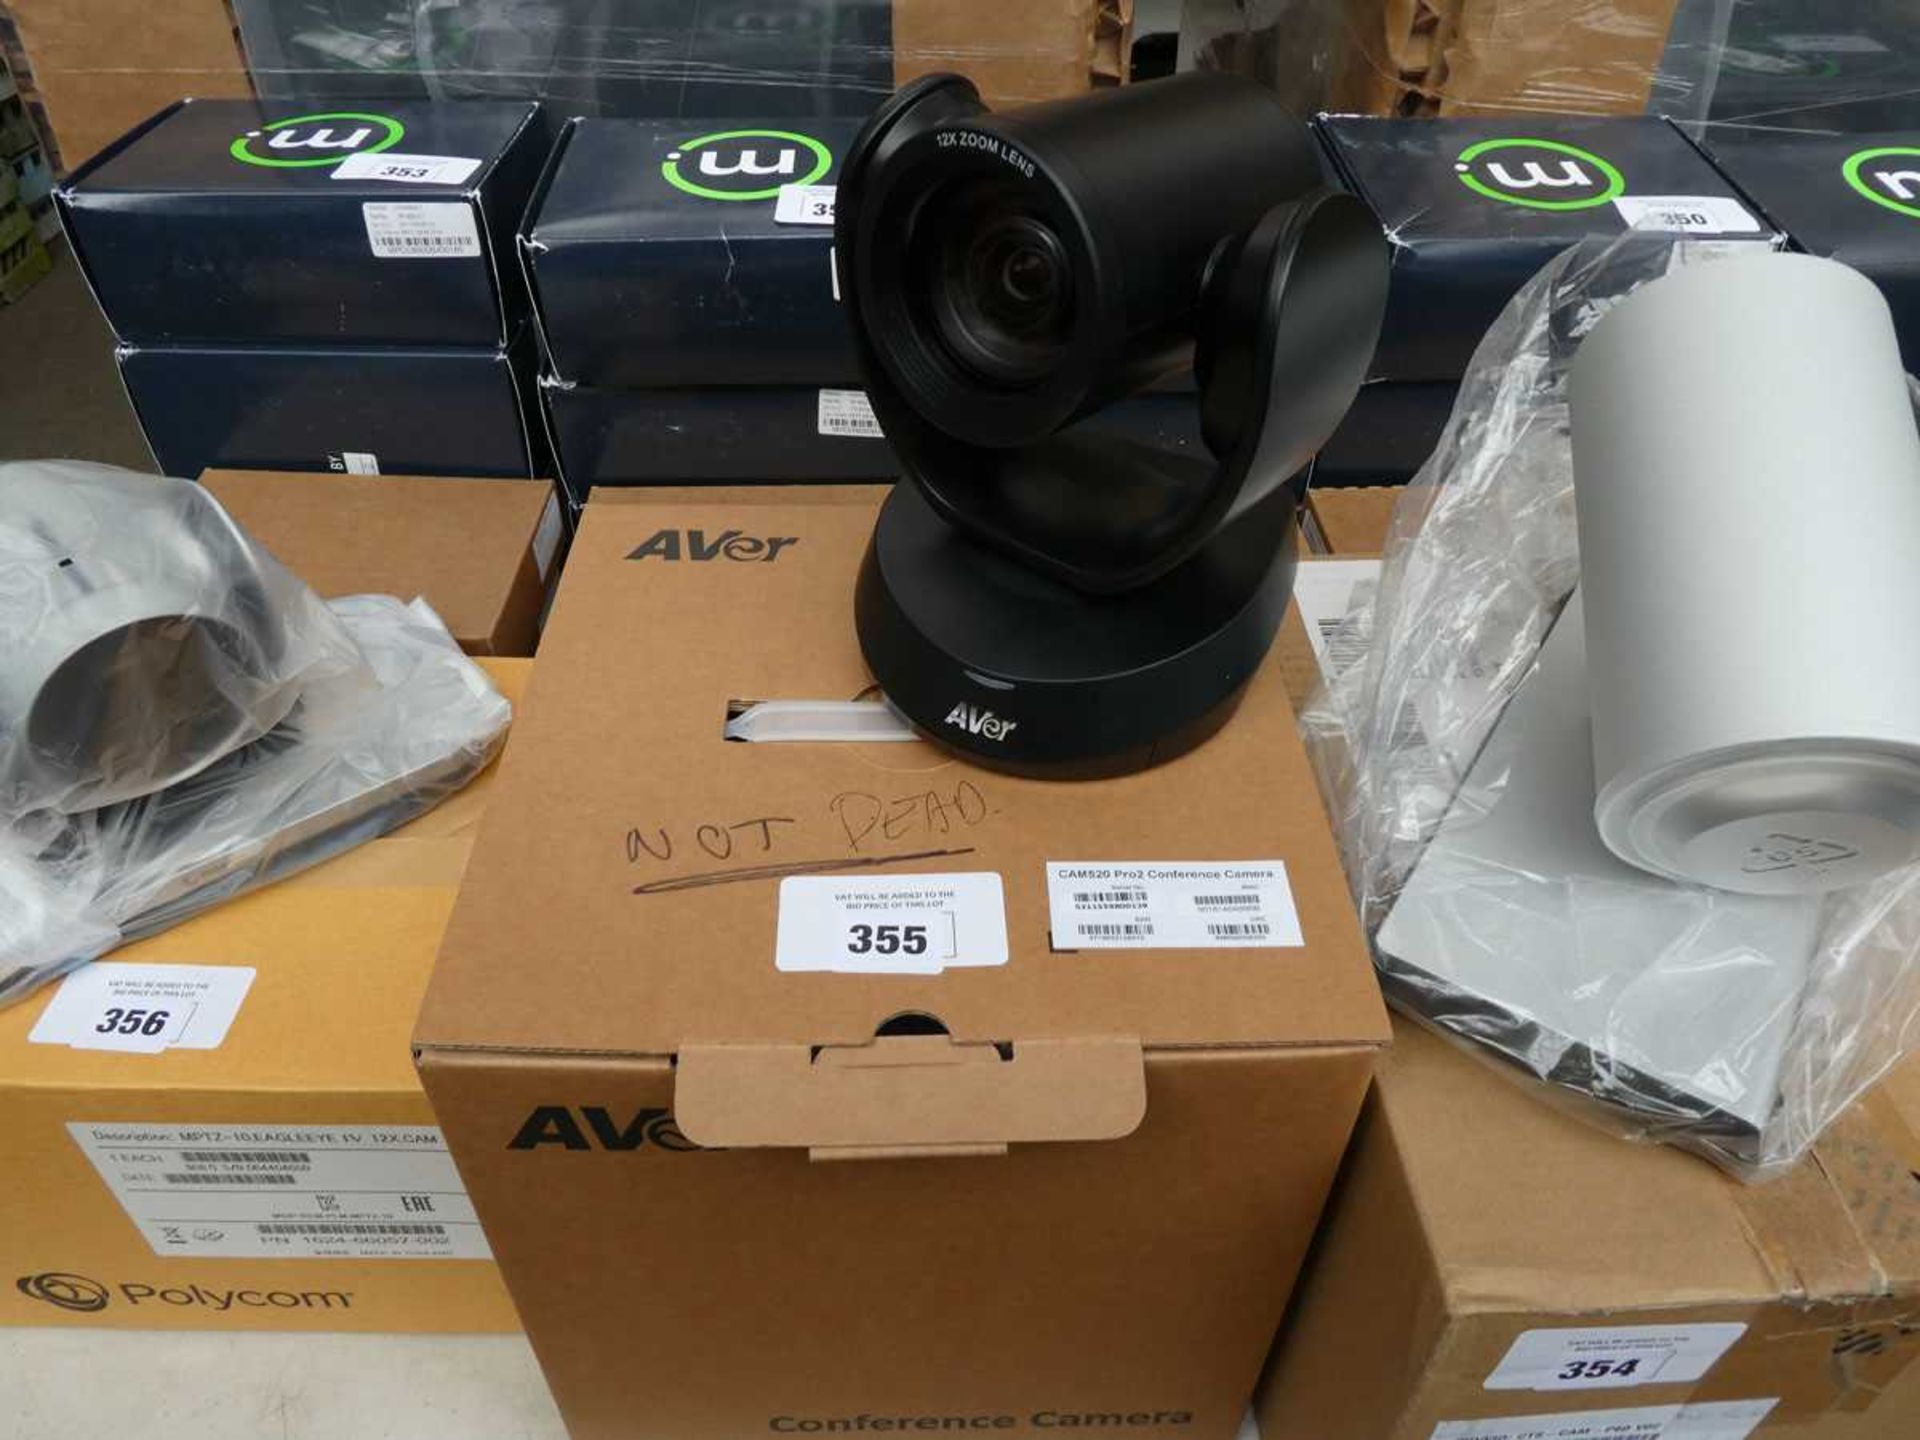 +VAT Aver conference camera CAM520 Pro 2 with box - Image 2 of 2